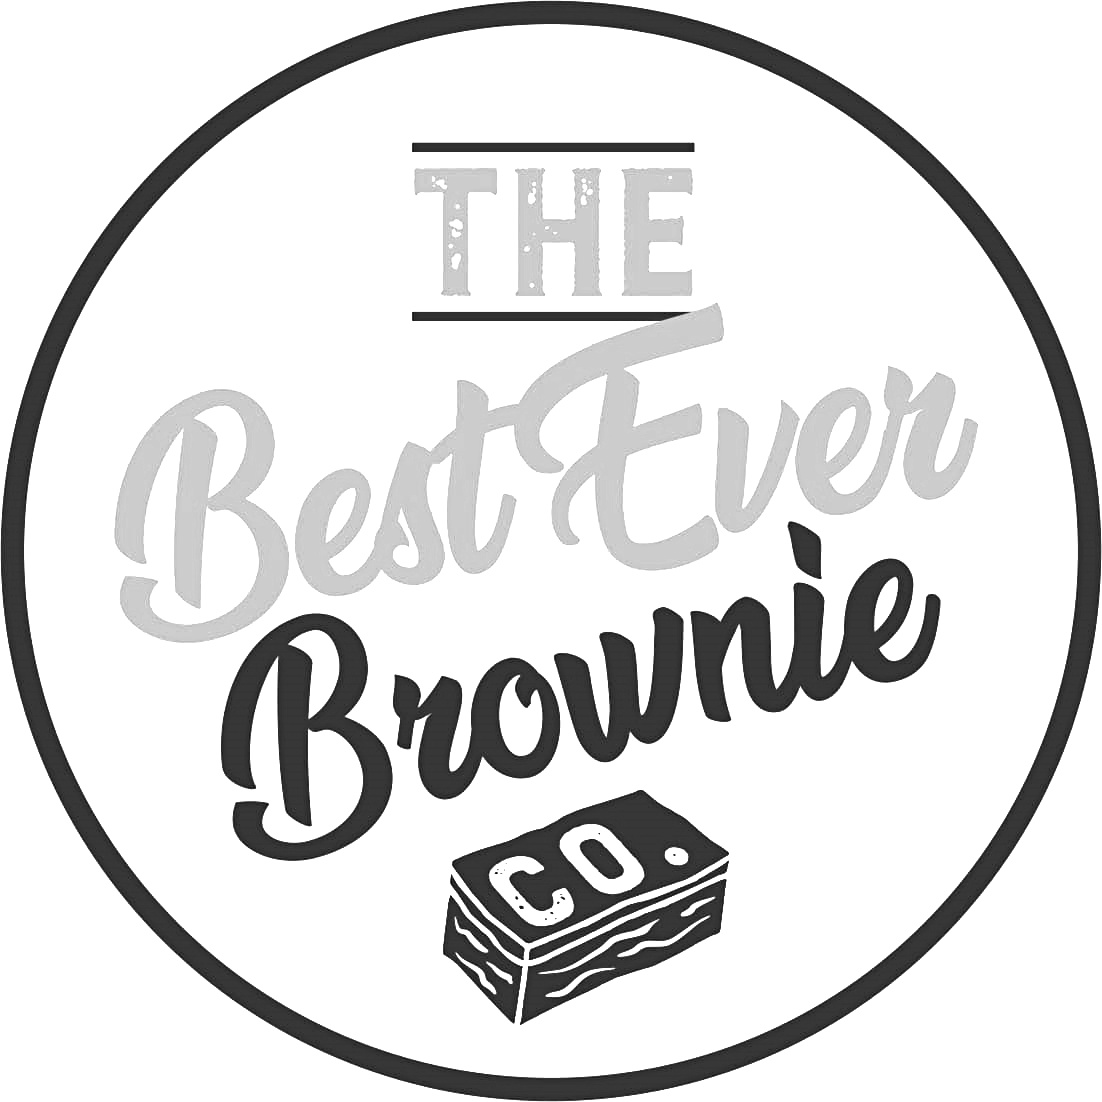 Brand logo for The Best Ever Brownie Company